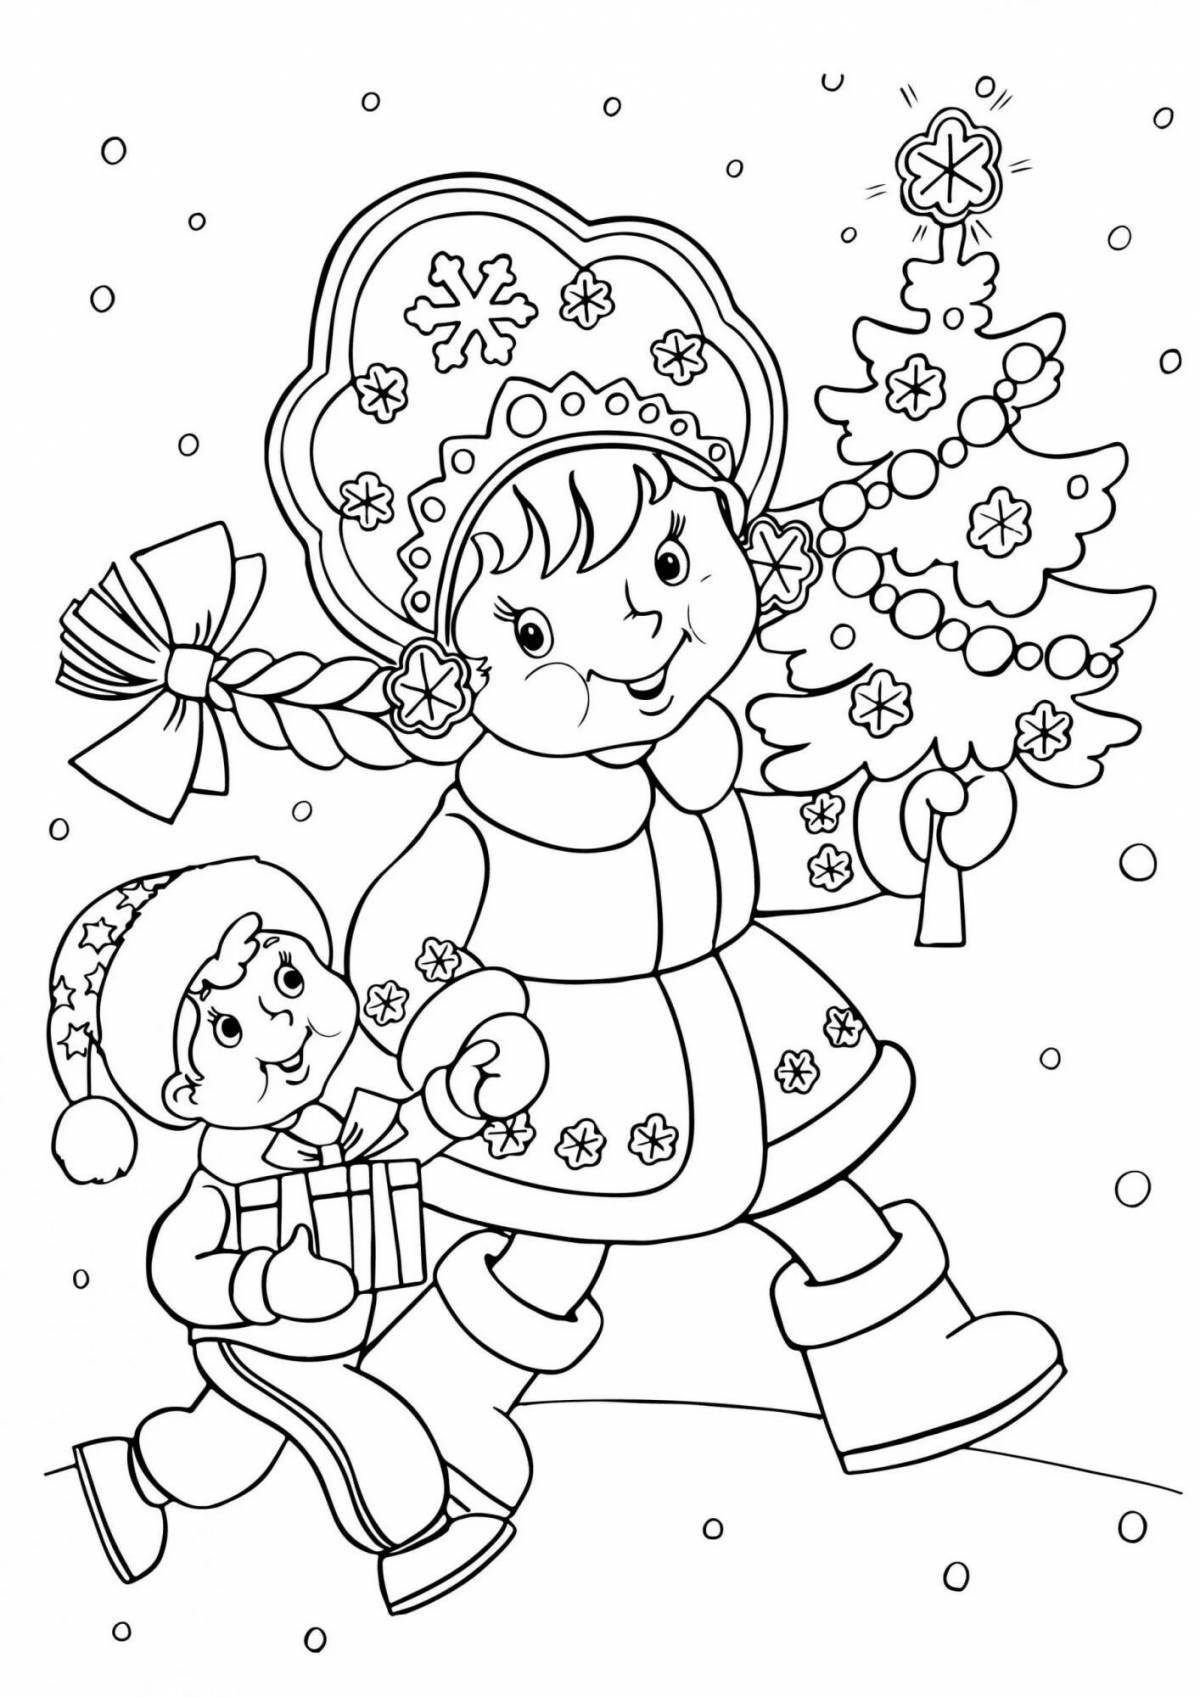 Violent Christmas coloring for girls 6 years old